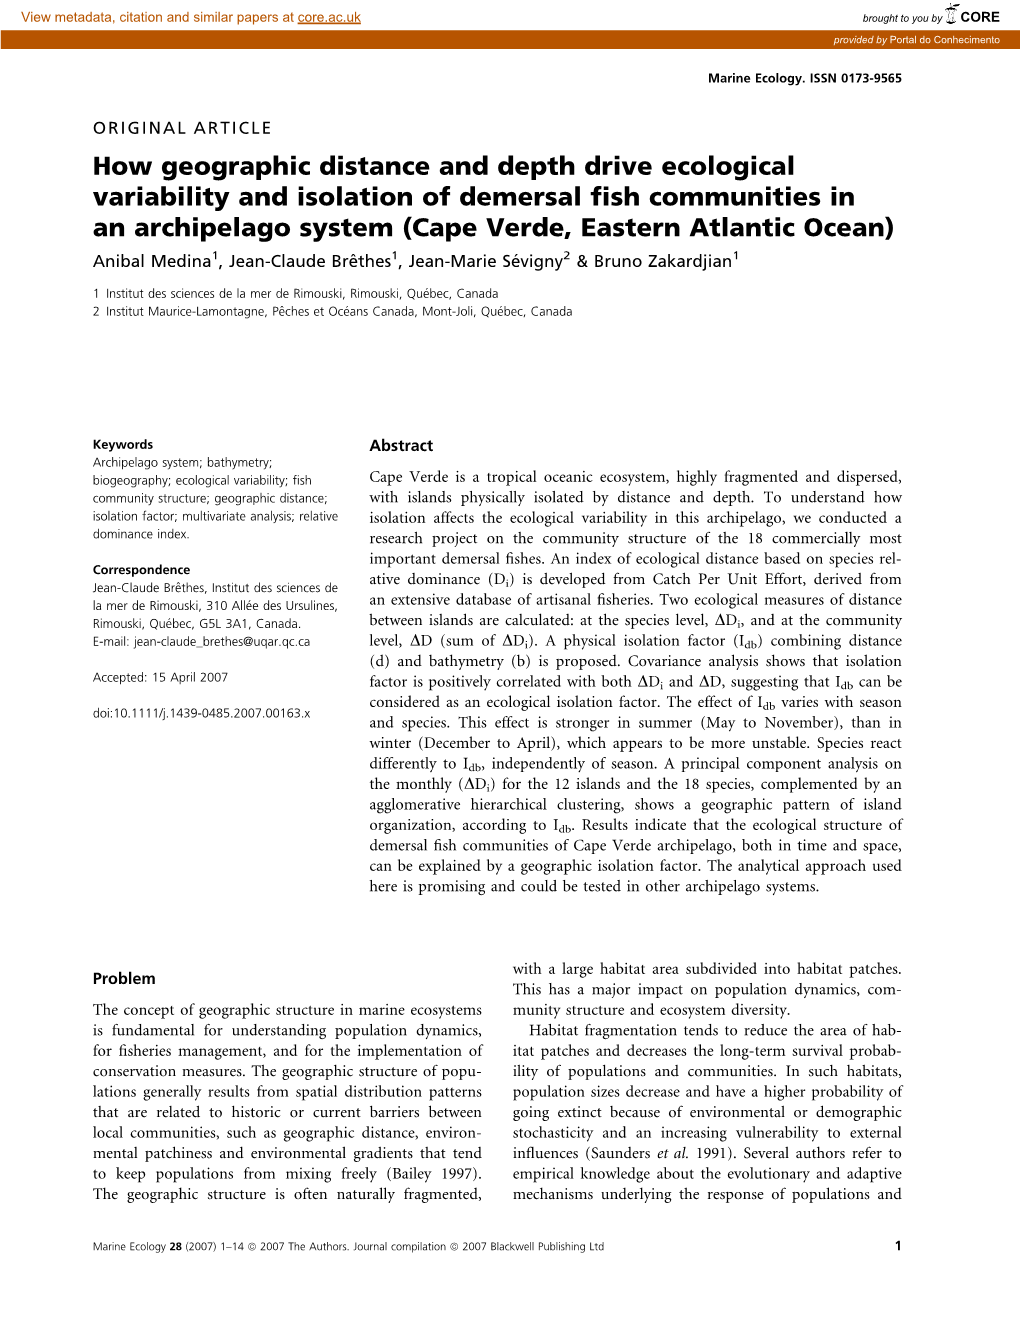 How Geographic Distance and Depth Drive Ecological Variability And